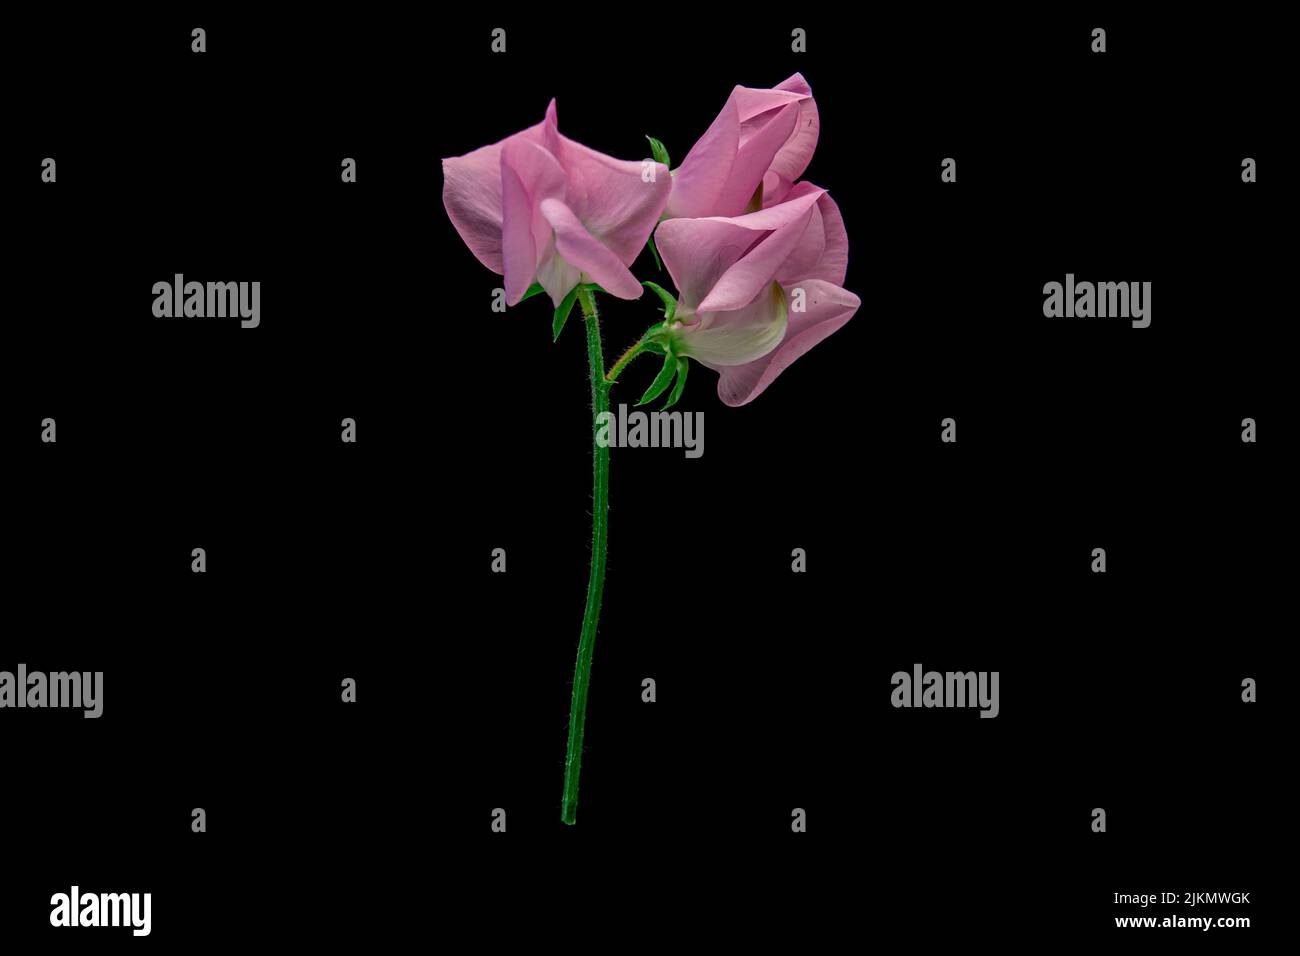 The pink sweet pea flower on black background Stock Photo